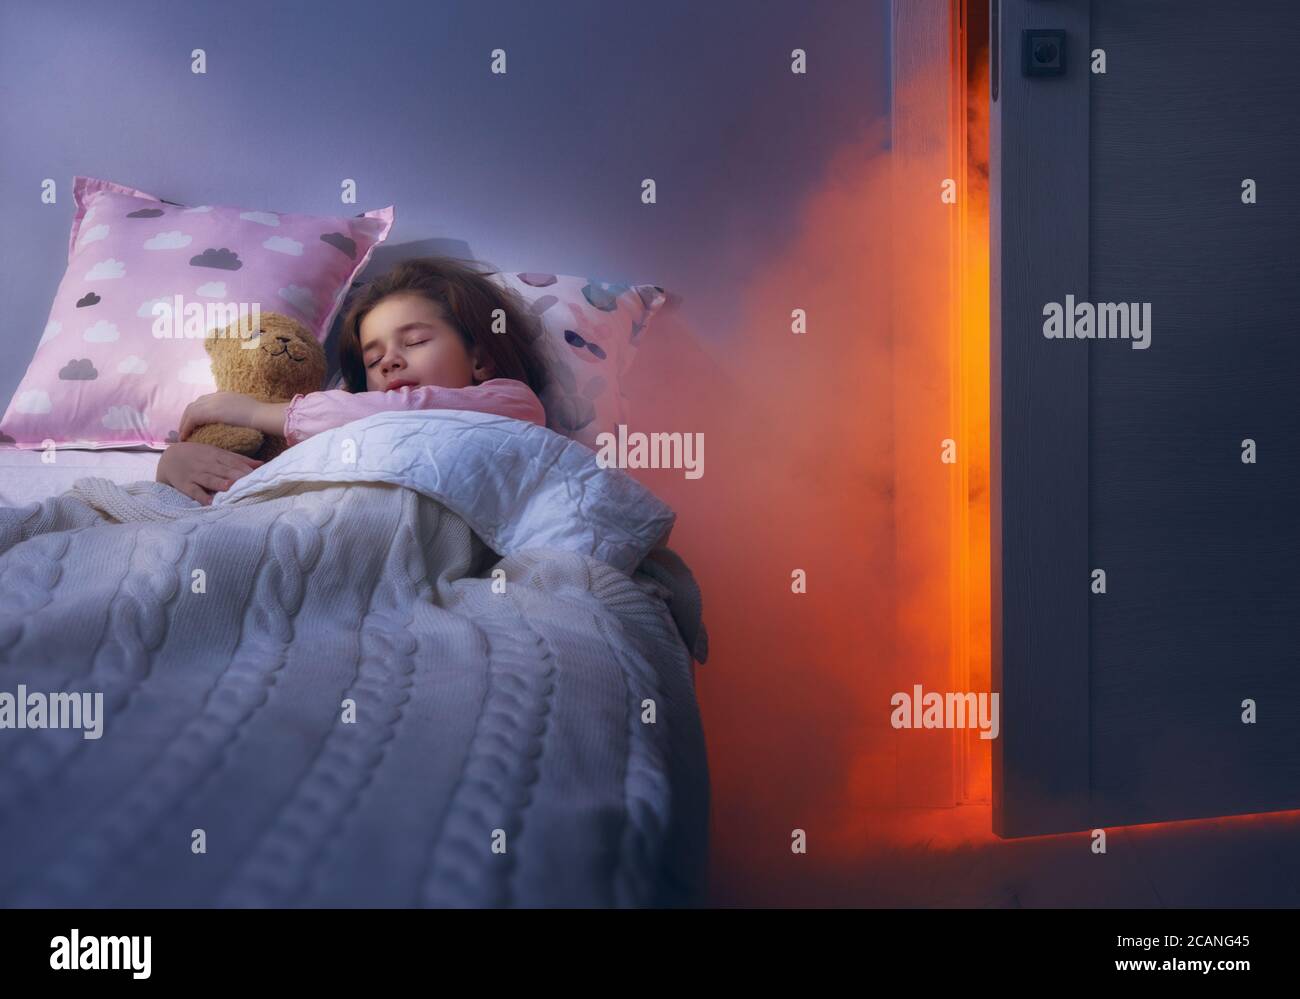 Nightmare for children. Little child girl is afraid of monsters in the dark of night. Stock Photo